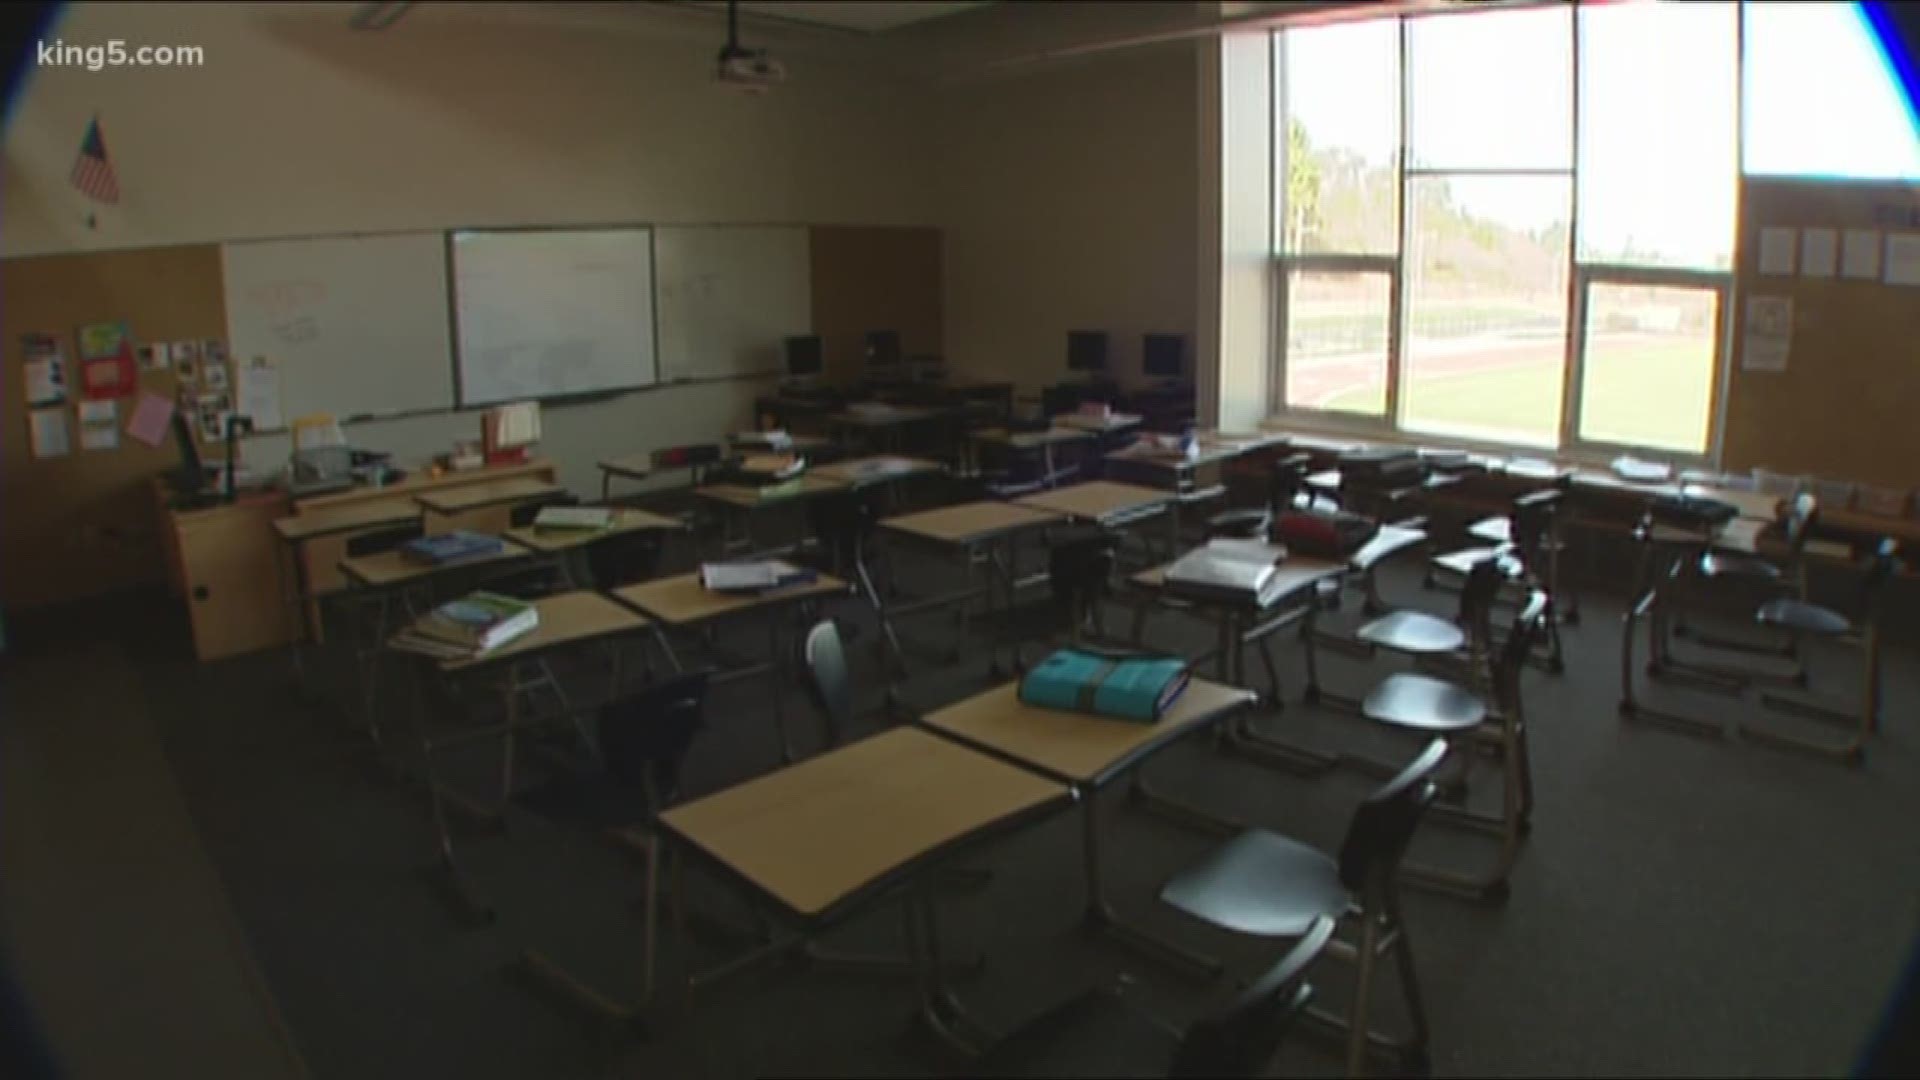 Identity plus algebra -- the equation is sparking conversation after Seattle Public Schools posted new guidelines. KING 5's Vanessa Misciagna reports.